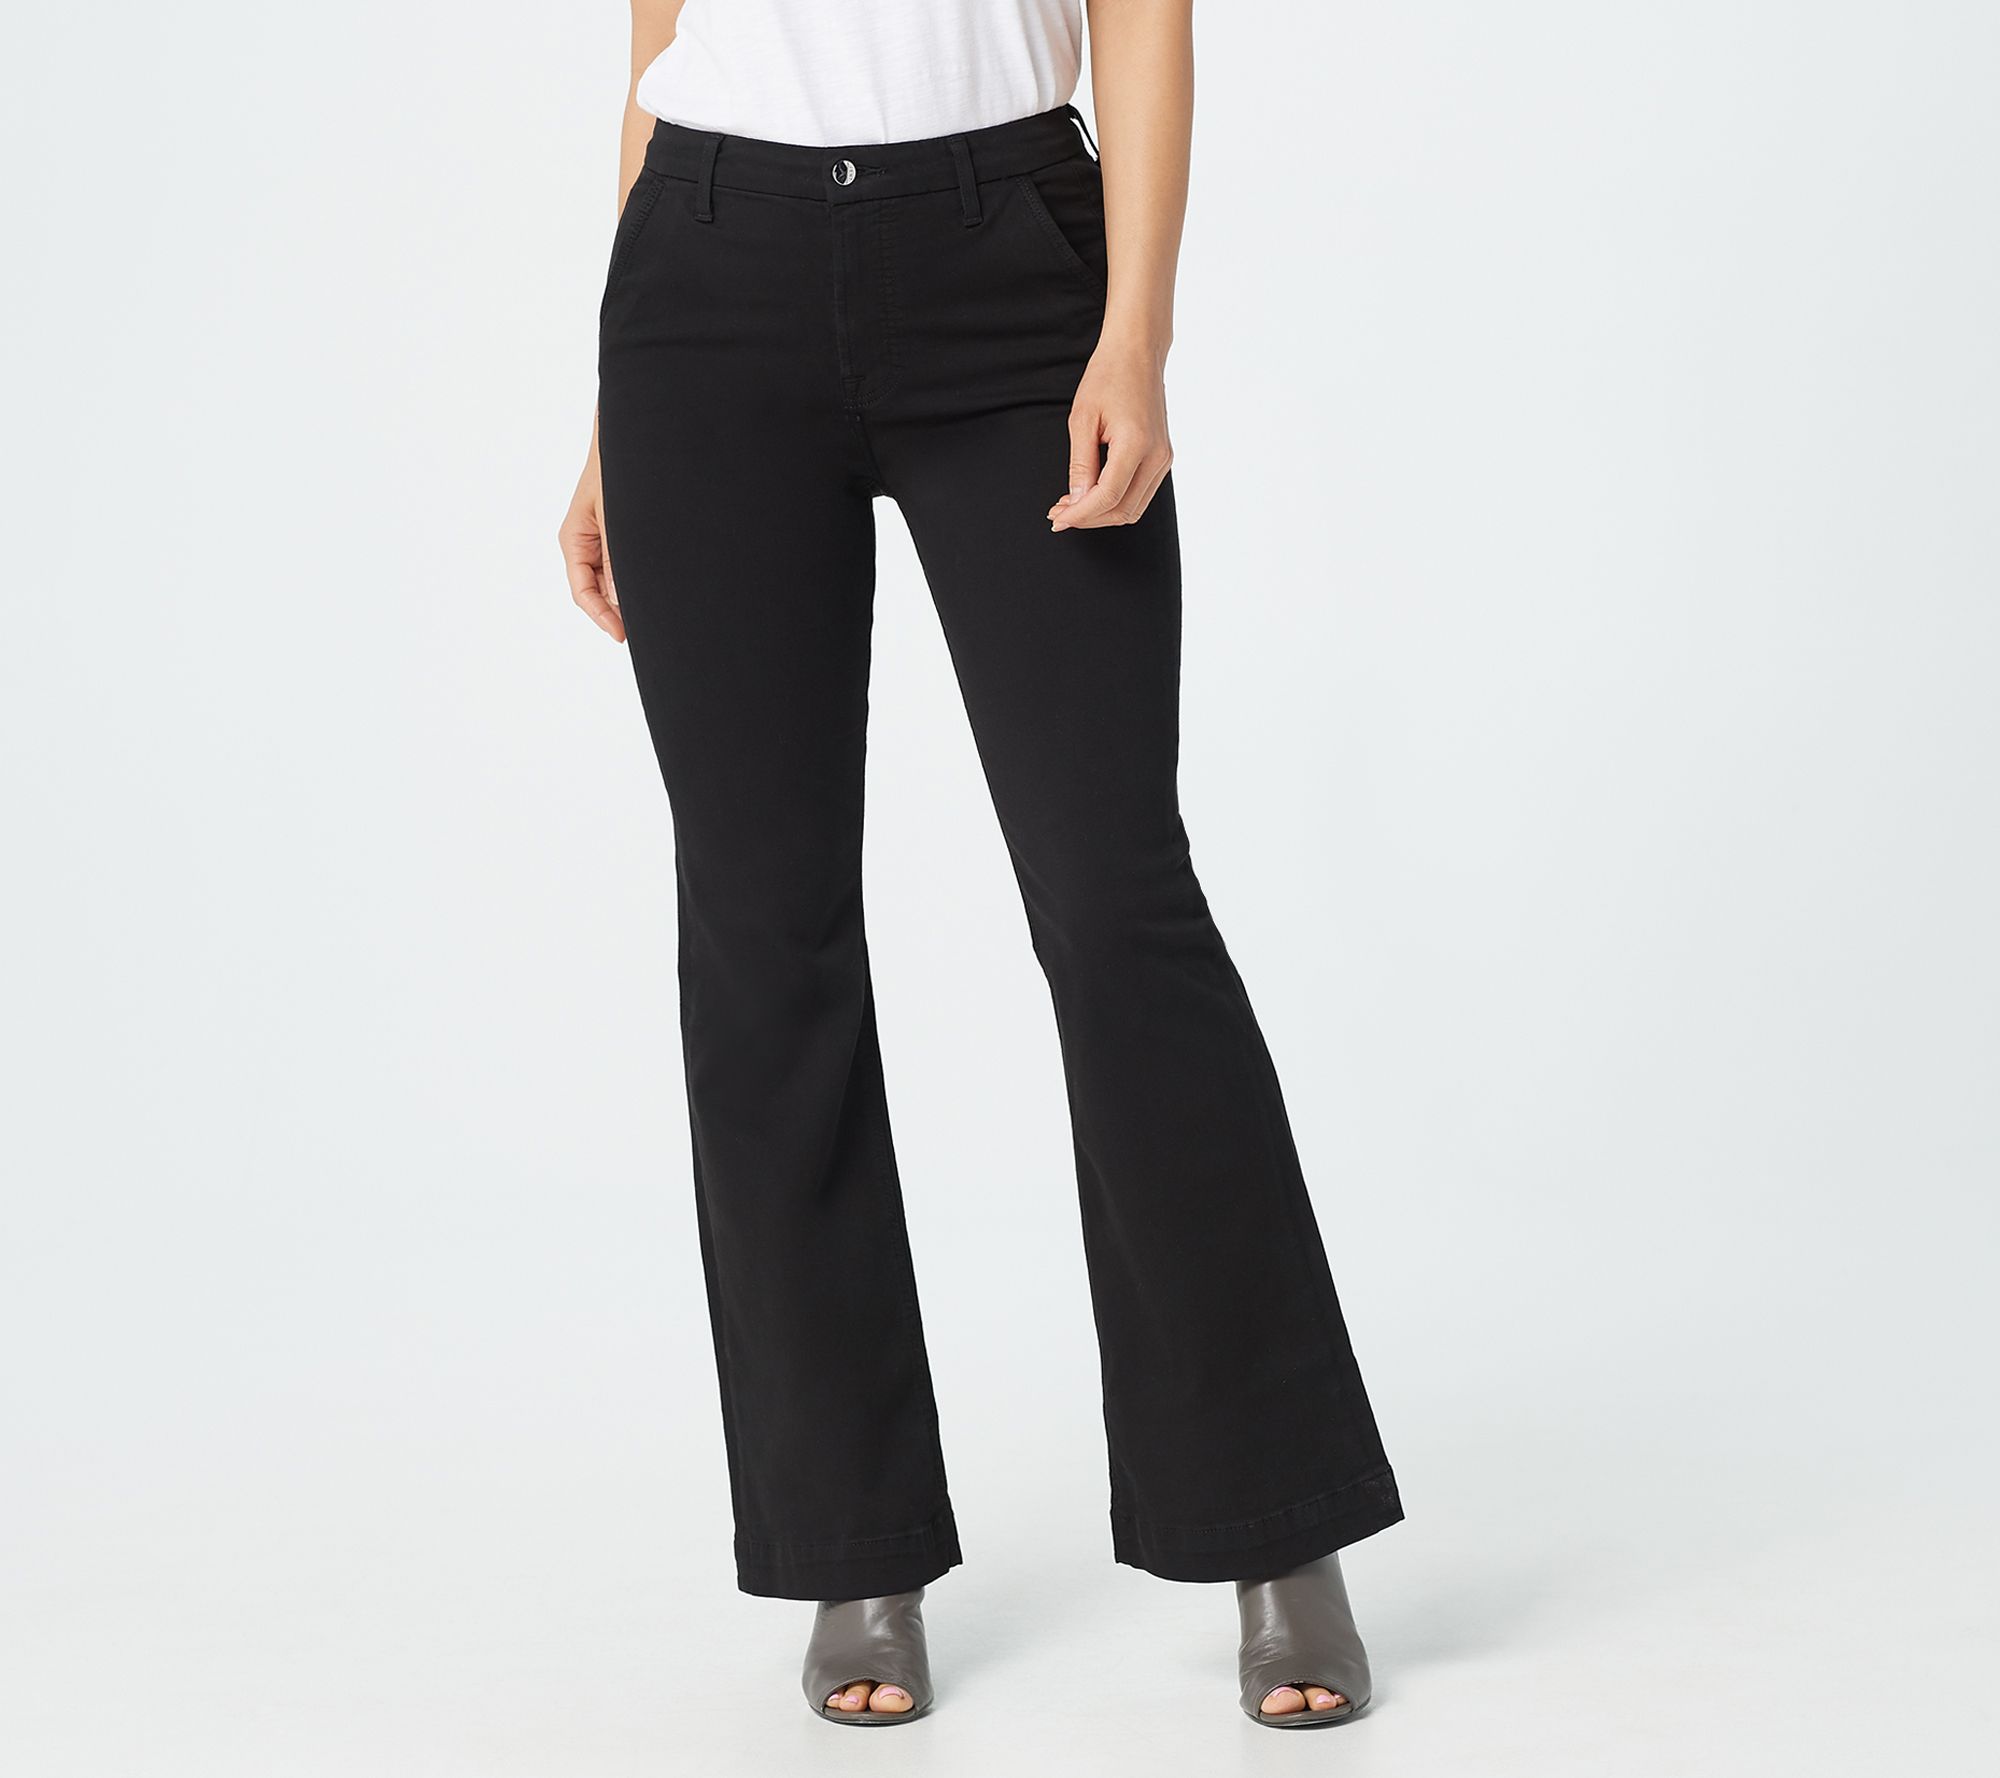 Jen7 by 7 for All Mankind Tailorless Trousers - Black - QVC.com